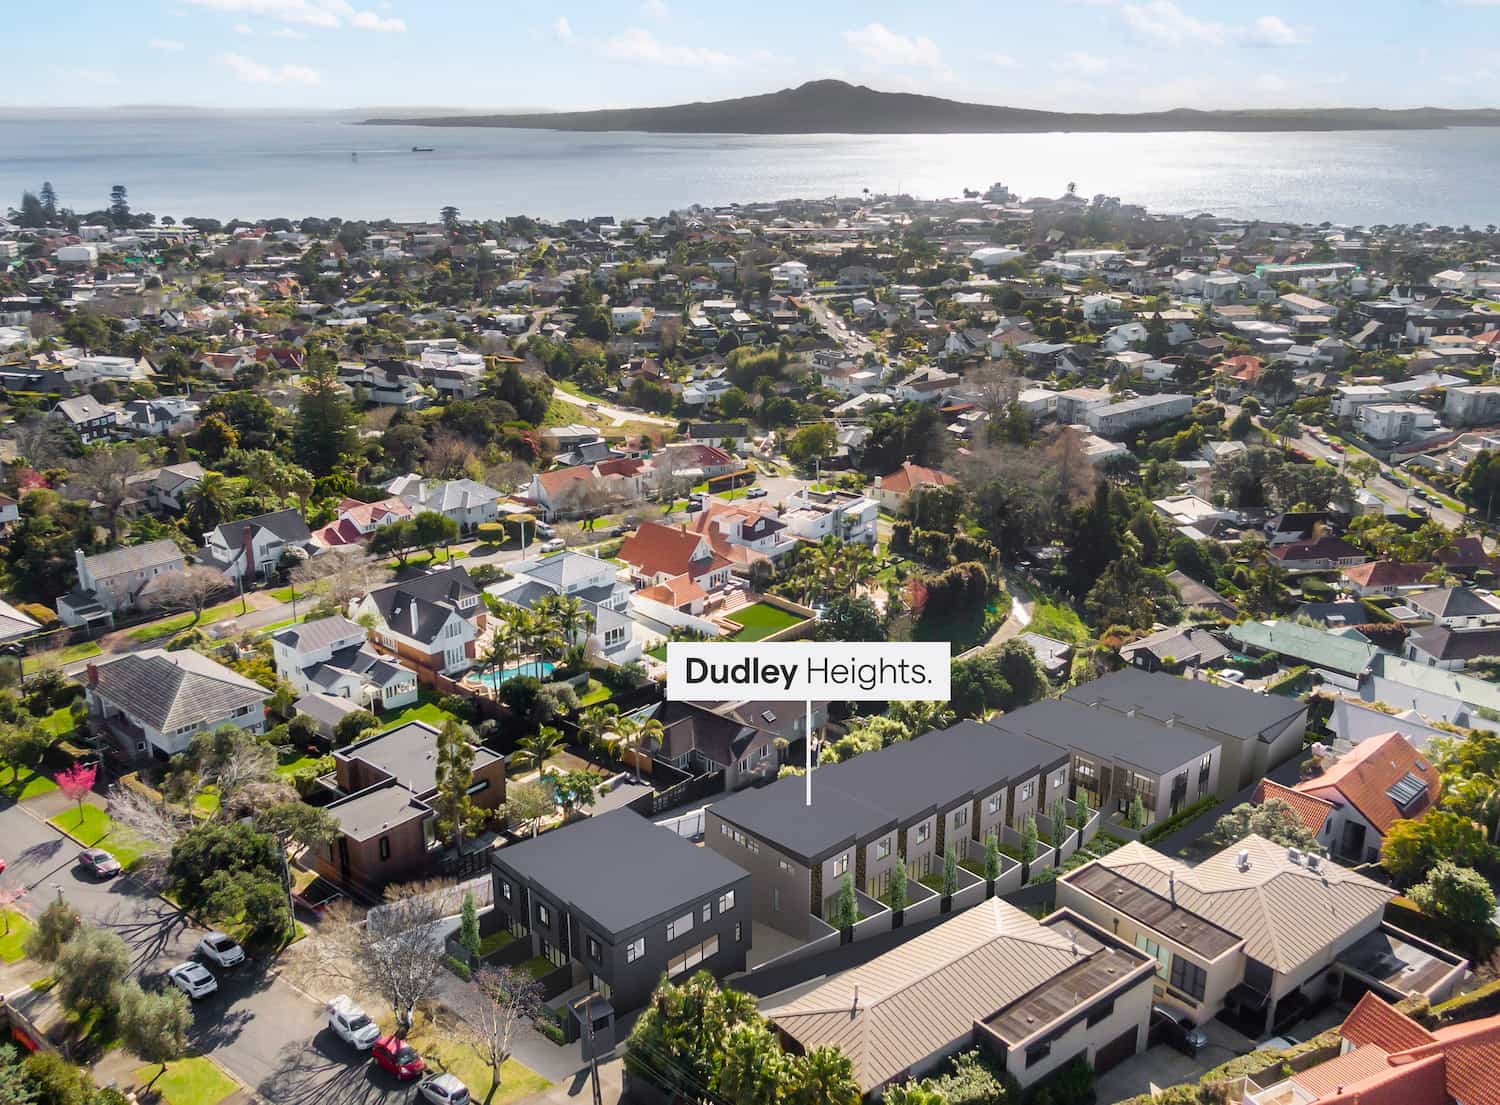 Dudley Heights – Mission Bay